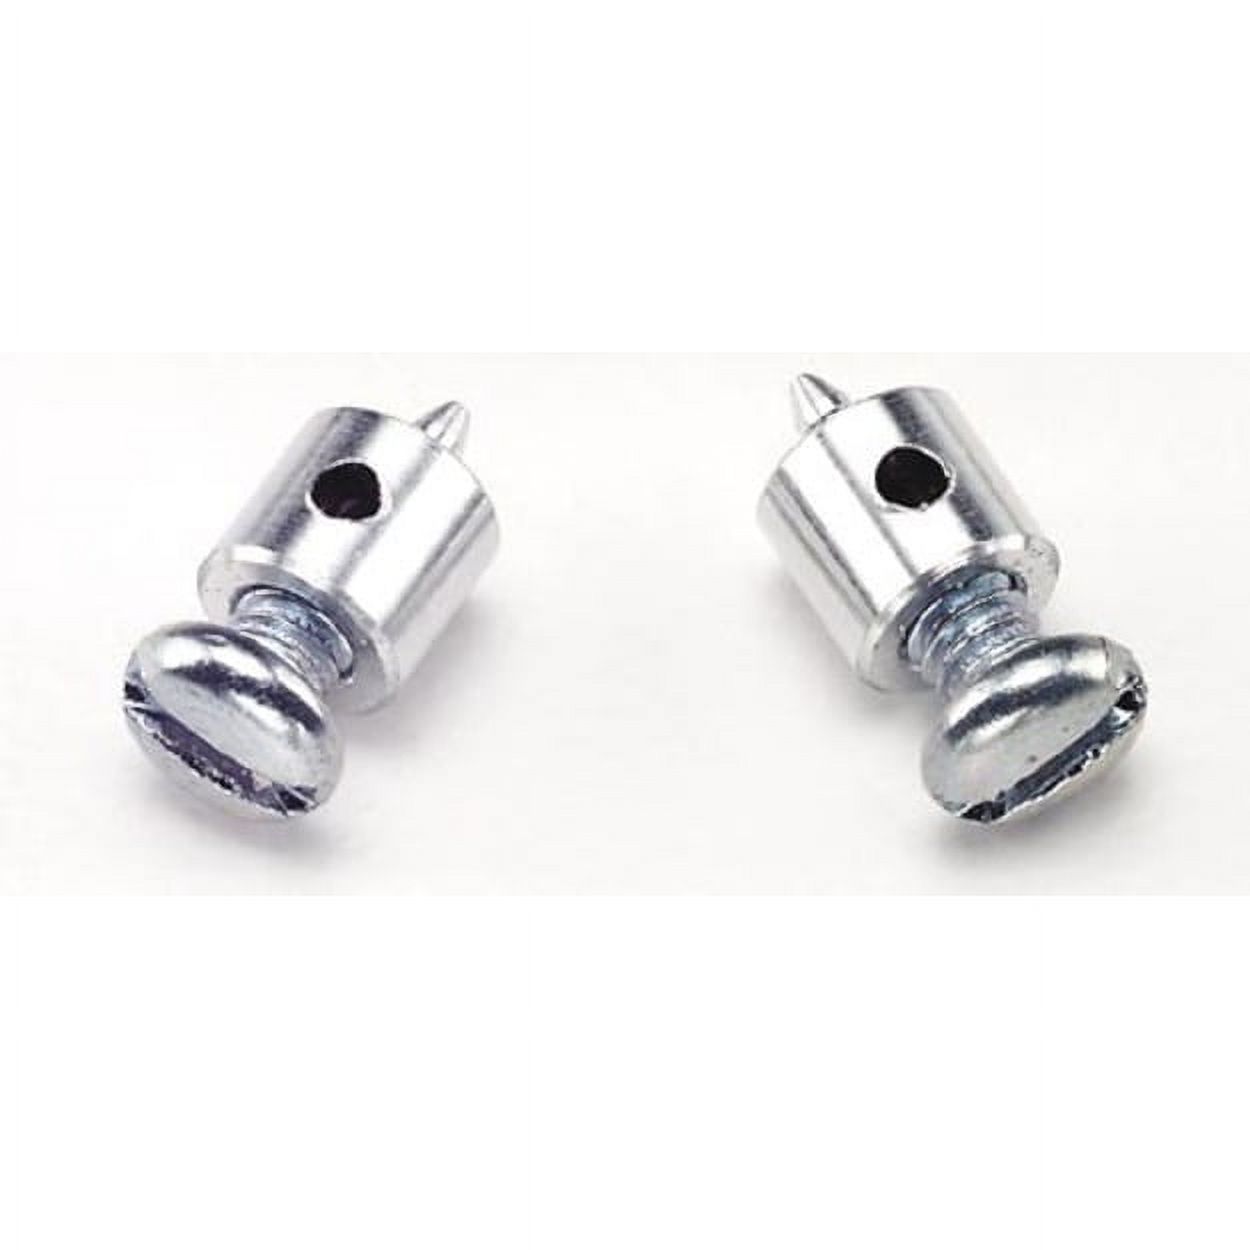 Dubro Products DUB845 Mini E-Z Connector, Pack of 2 - image 3 of 3